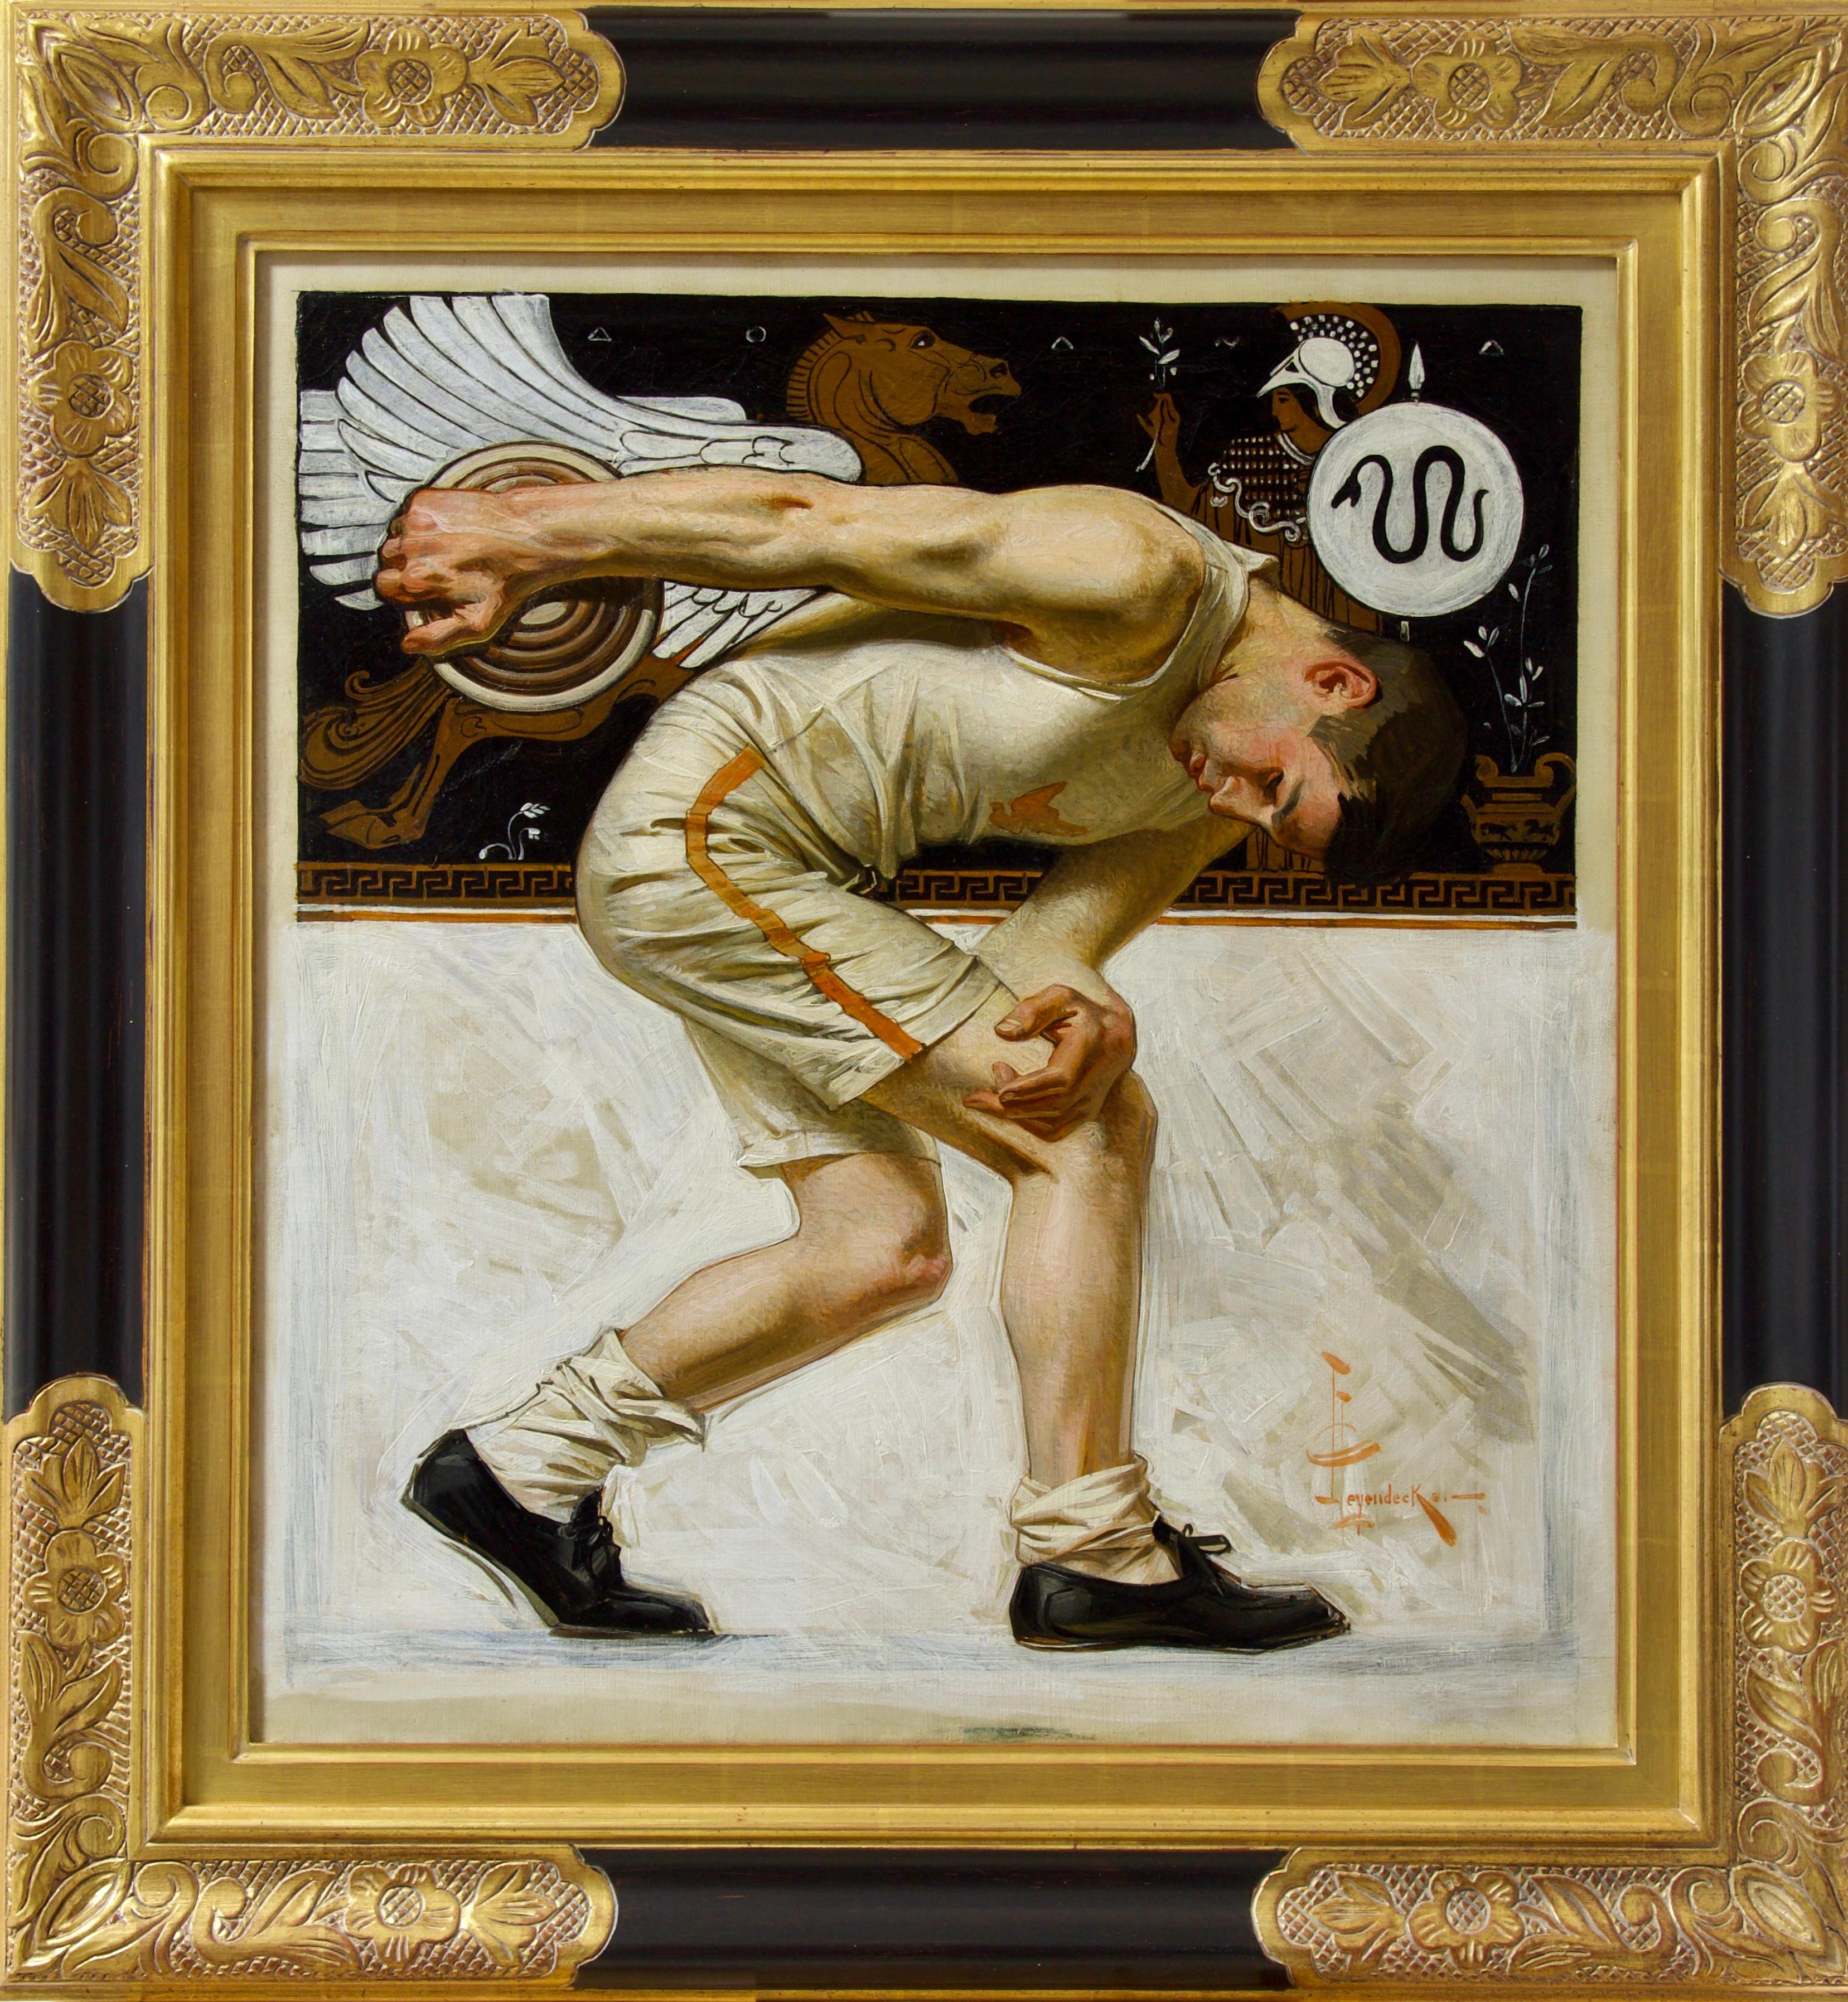 Joseph Christian Leyendecker Figurative Painting - The Discus Thrower, Collier's Magazine Cover